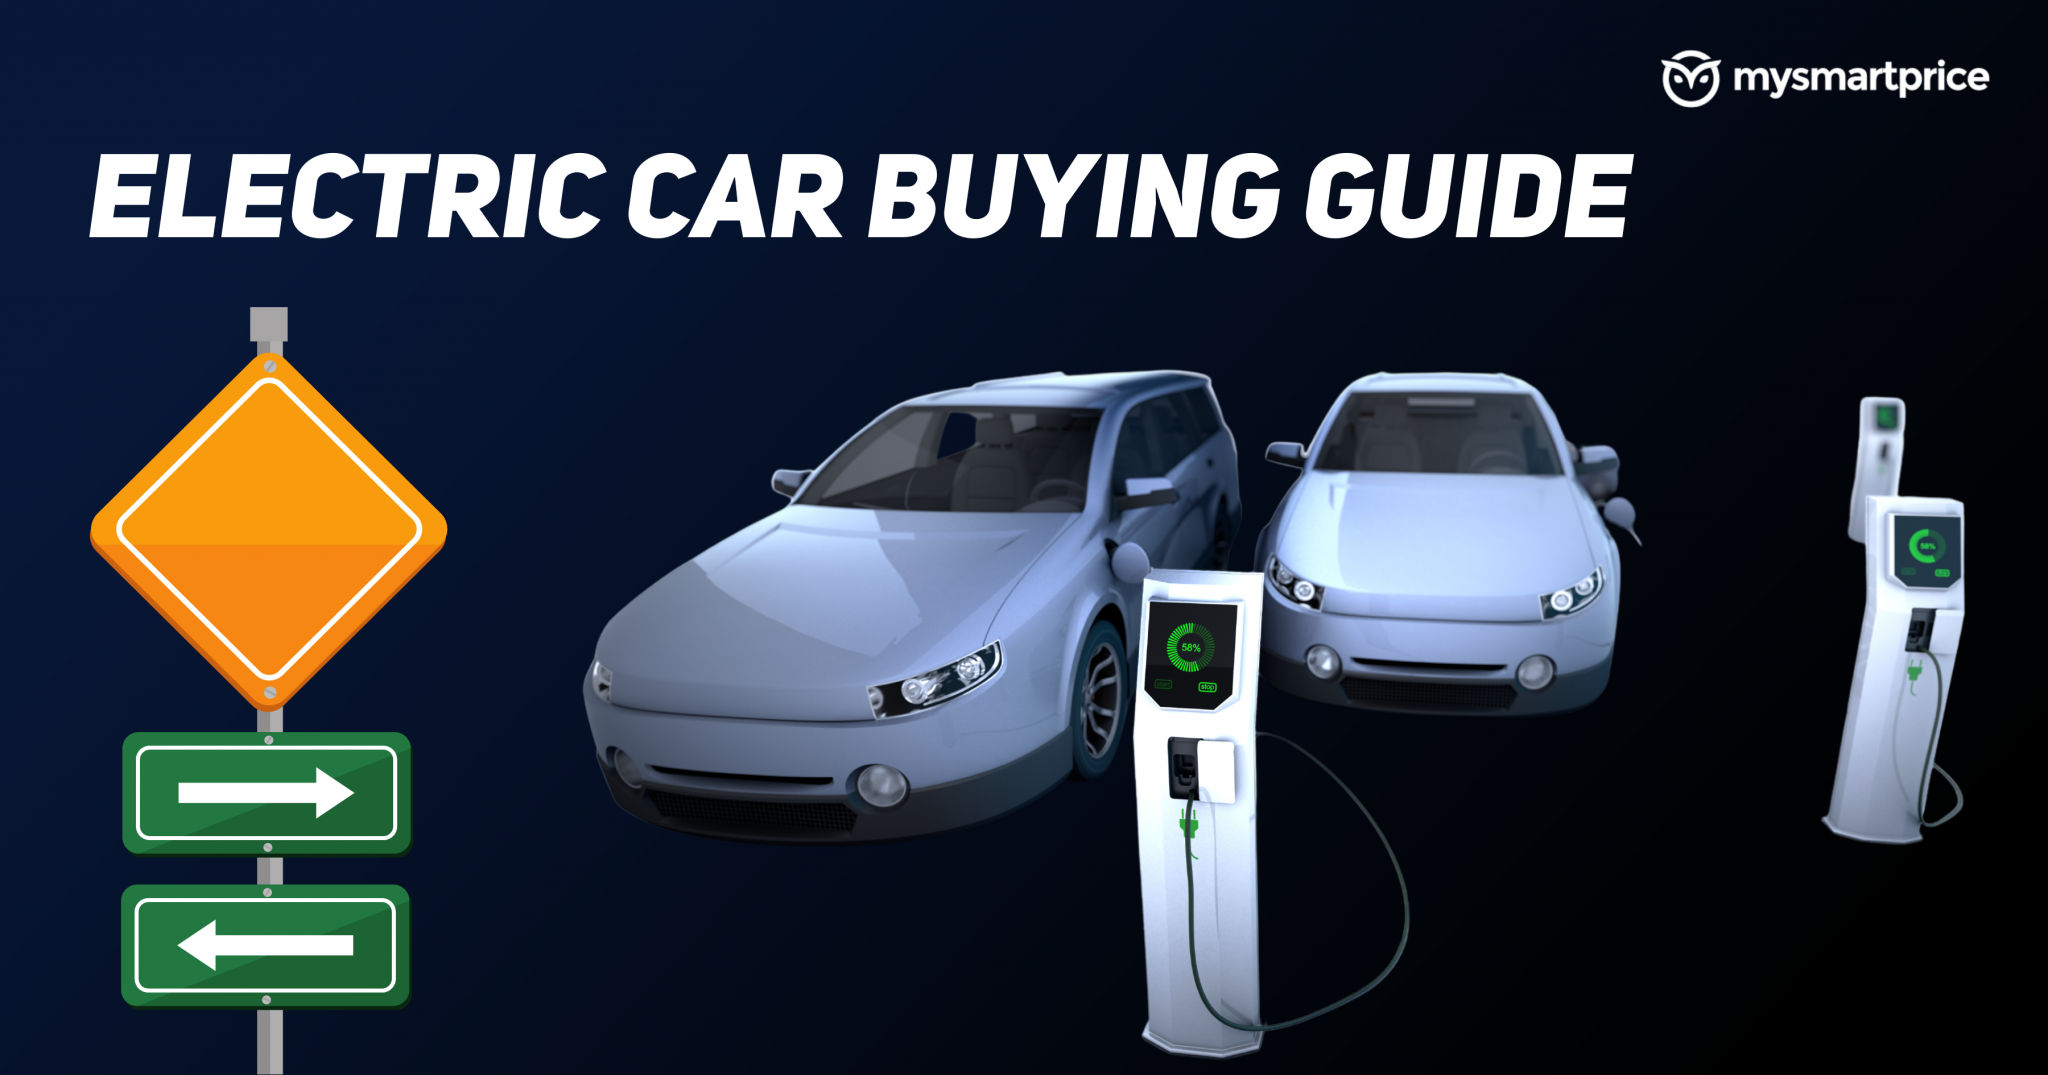 Electric Car Buying Guide Top 11 Things to Know Before Buying an